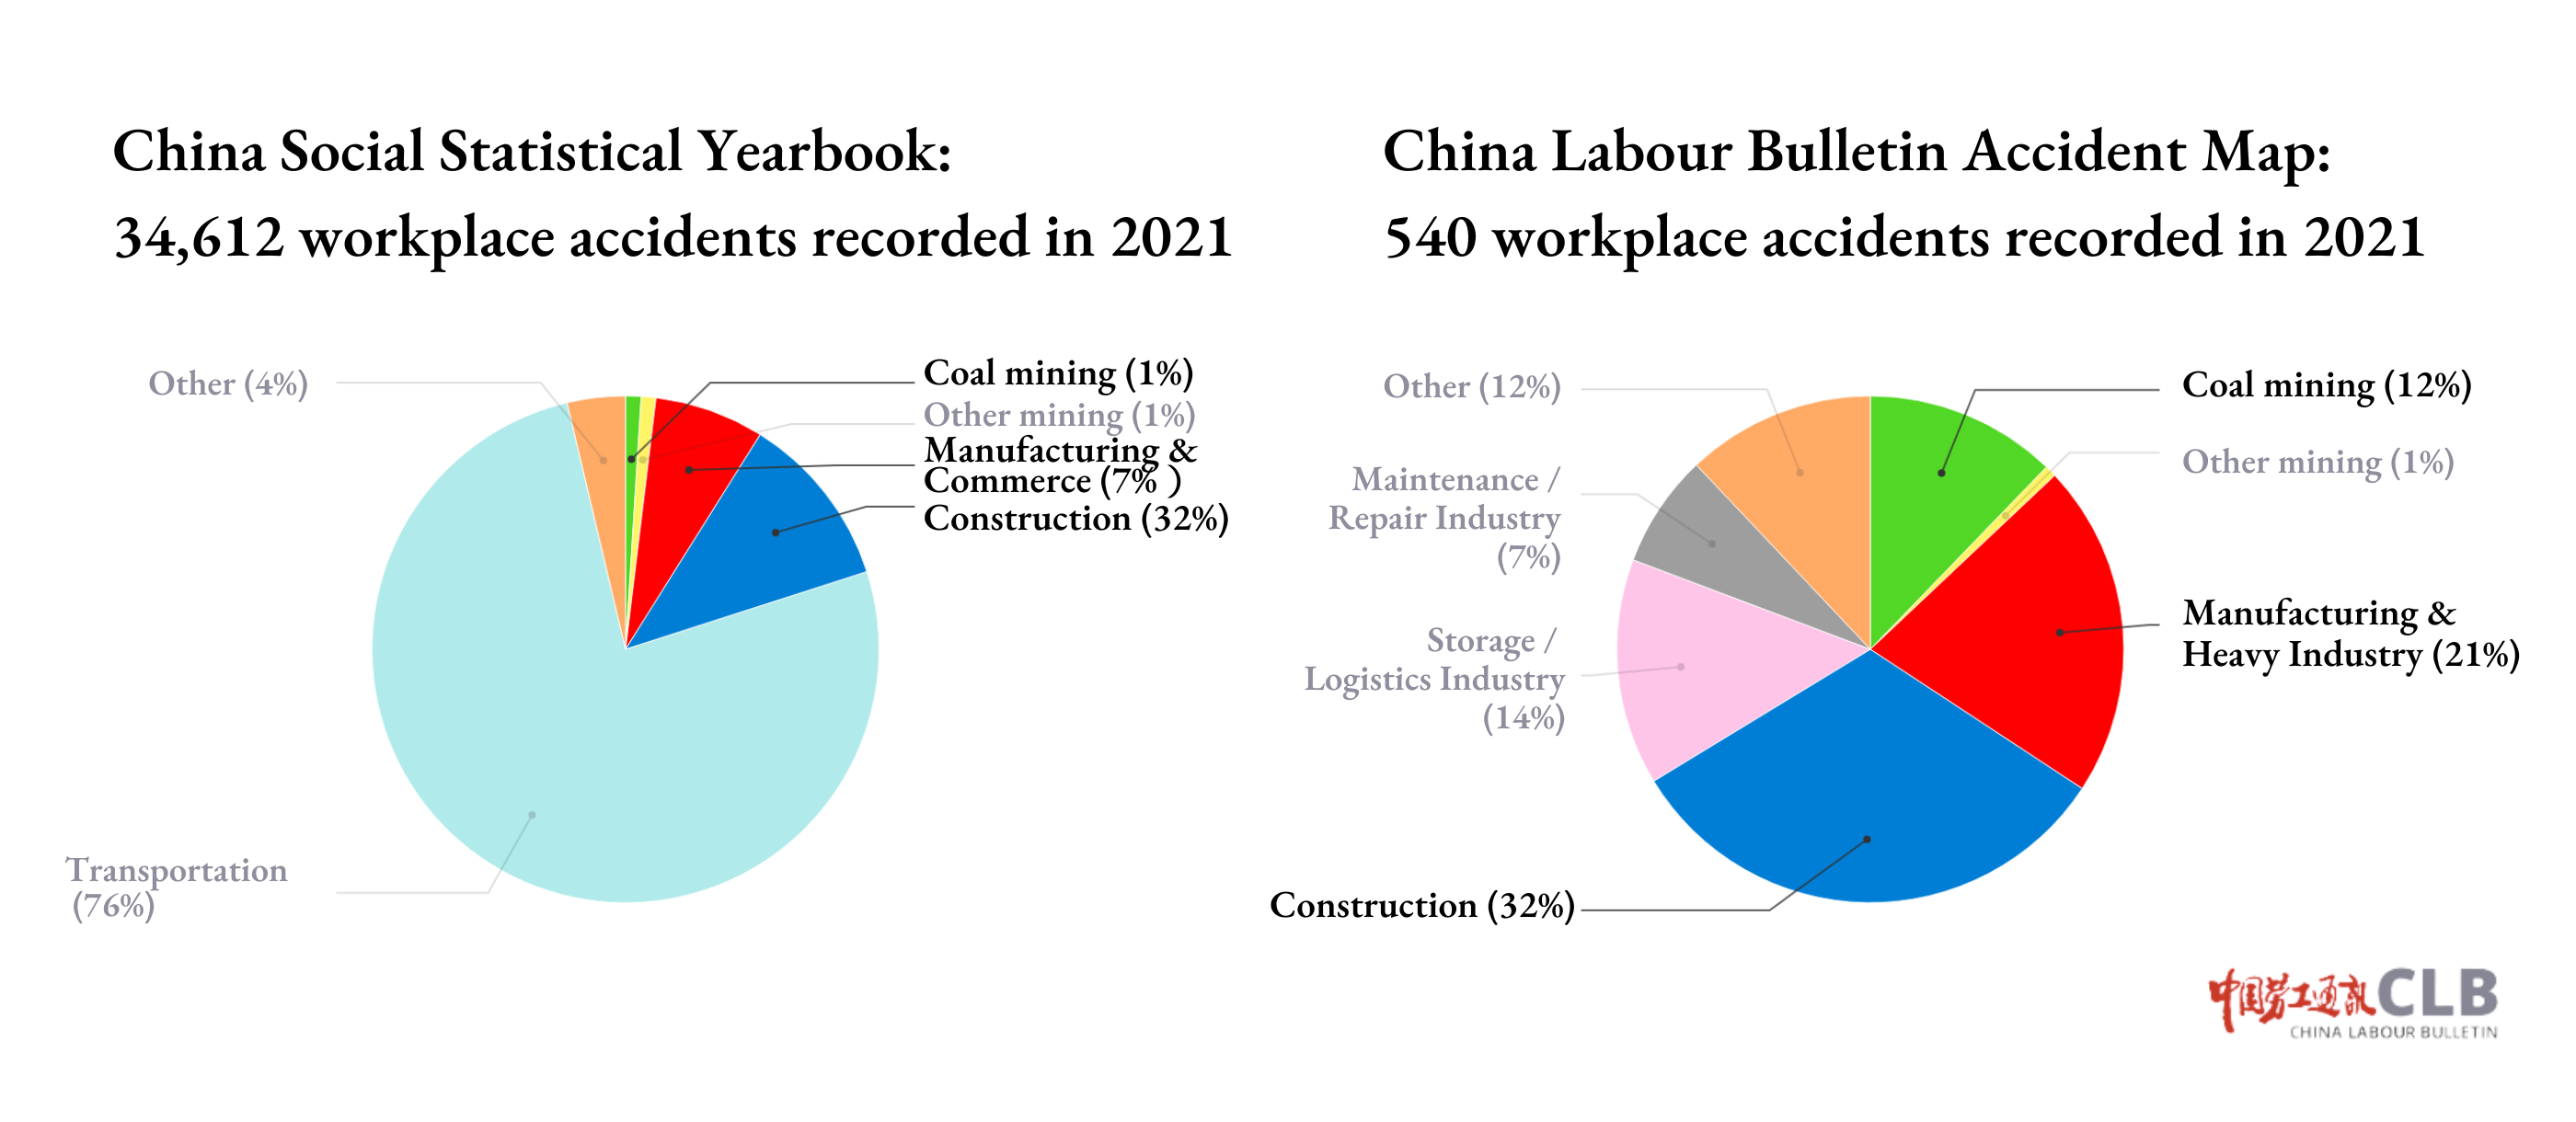 Official statistics on workplace accidents (2021) compared to CLB Accident Map data (2021)